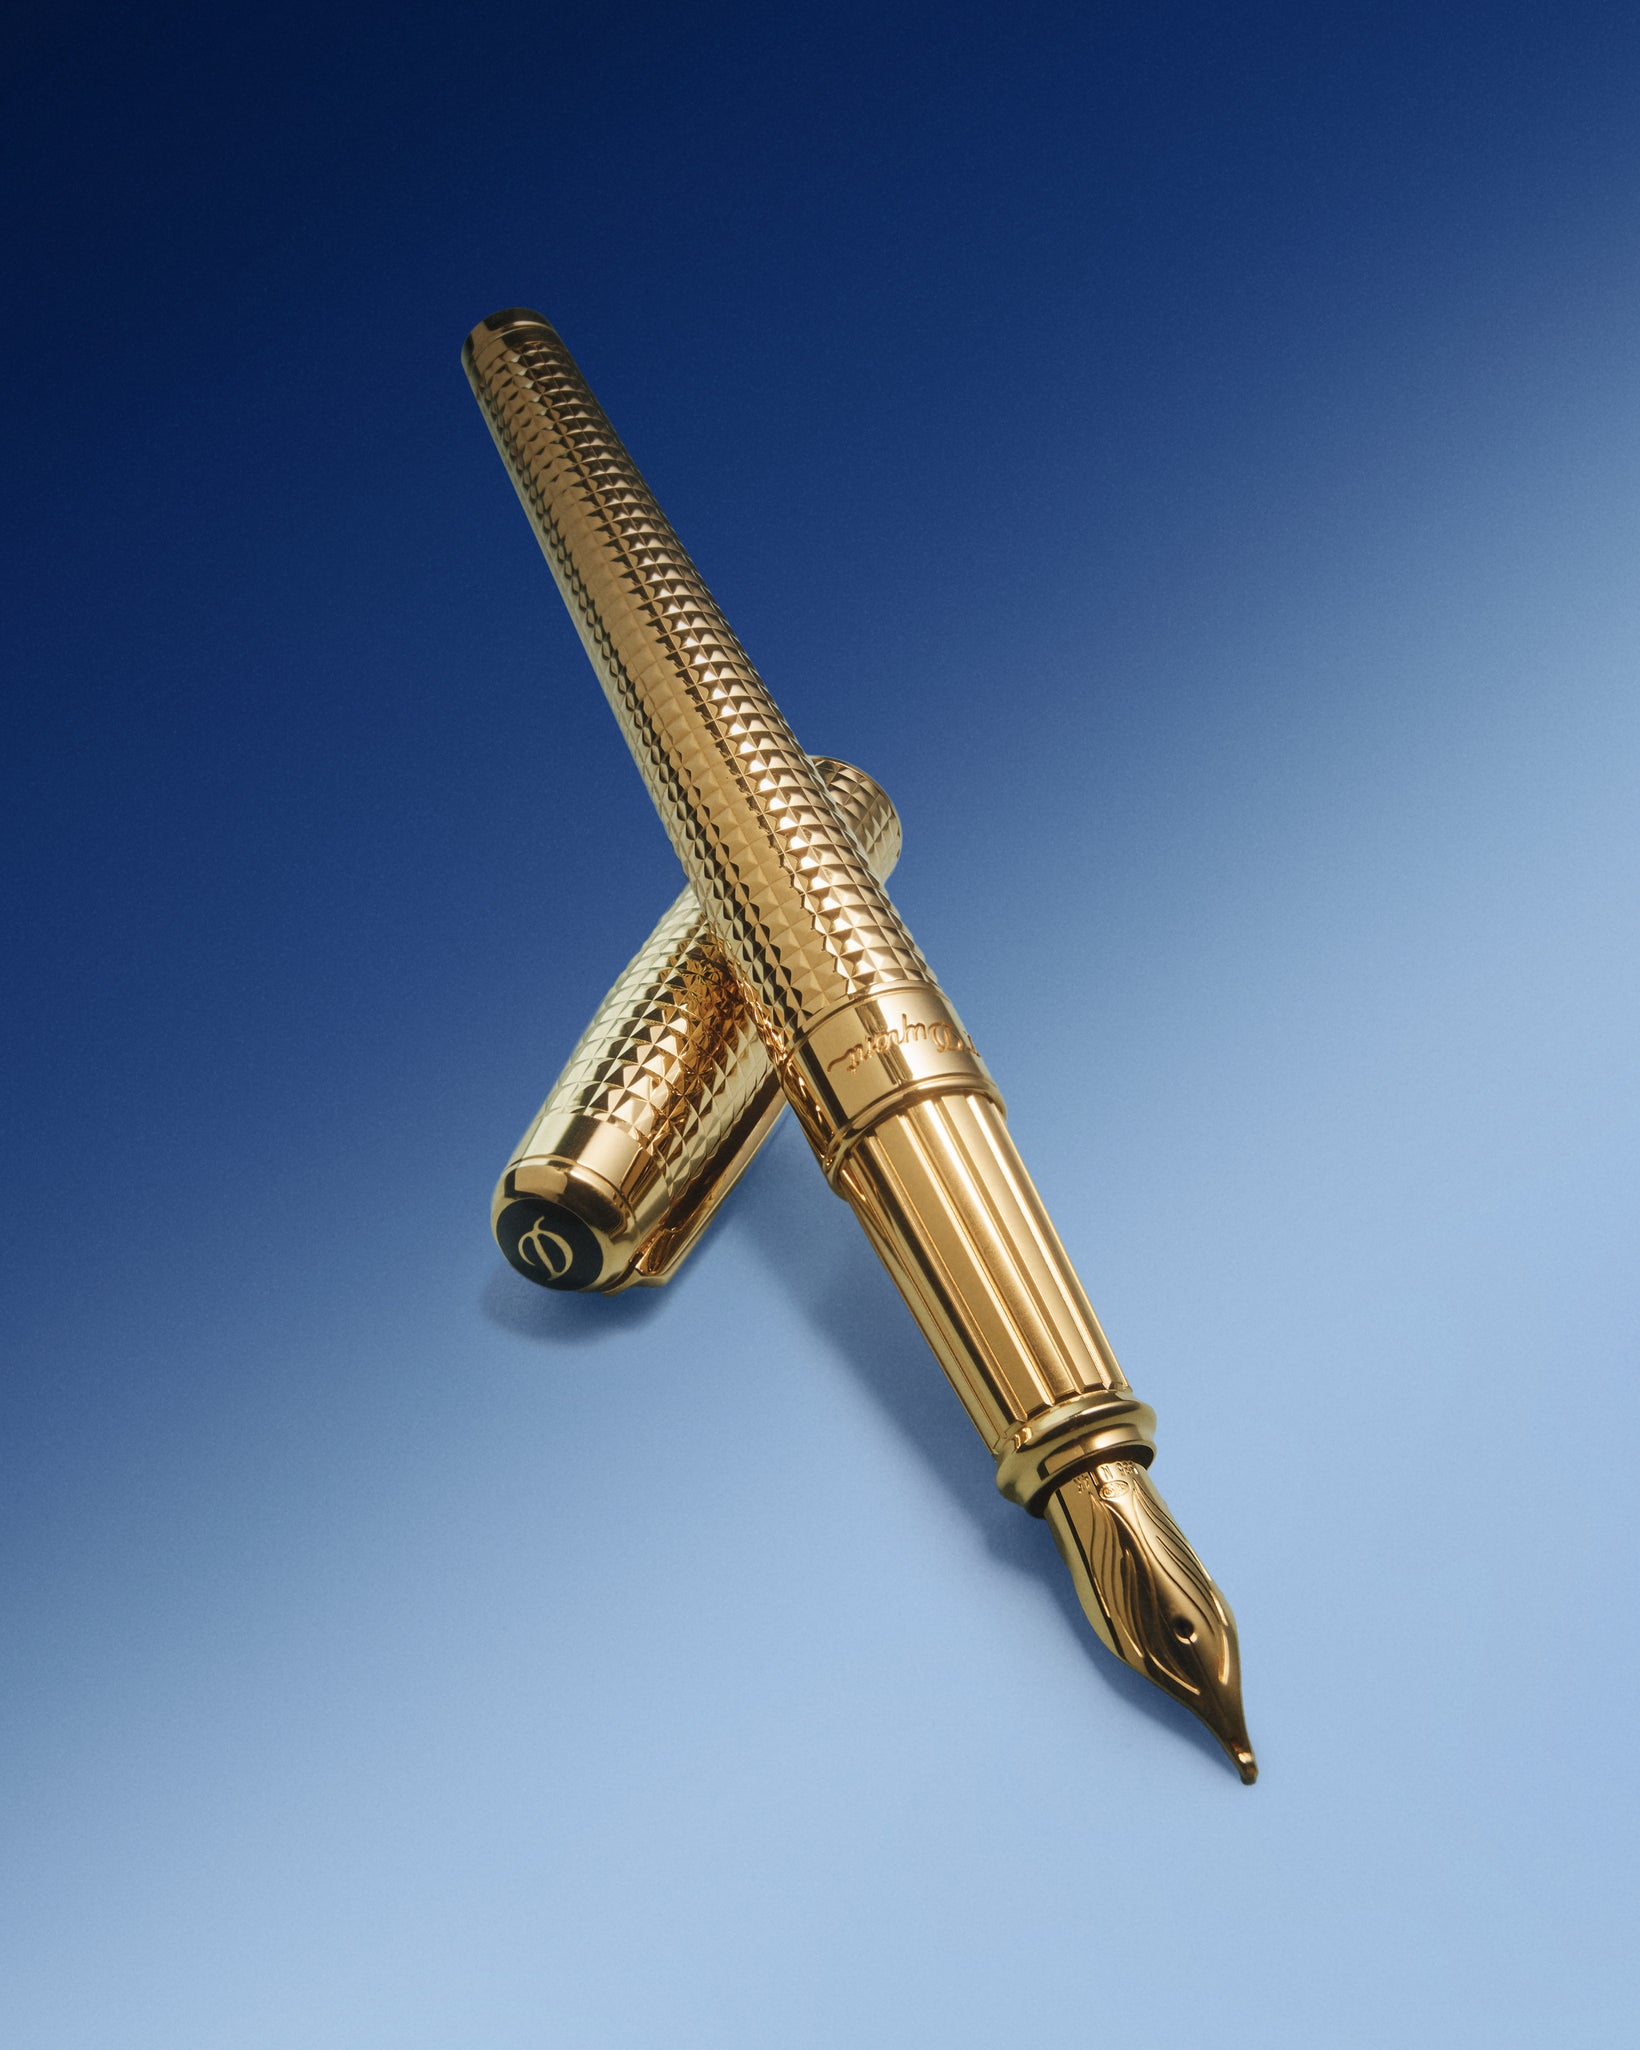 S.T. Dupont luxury fountain Pen collection